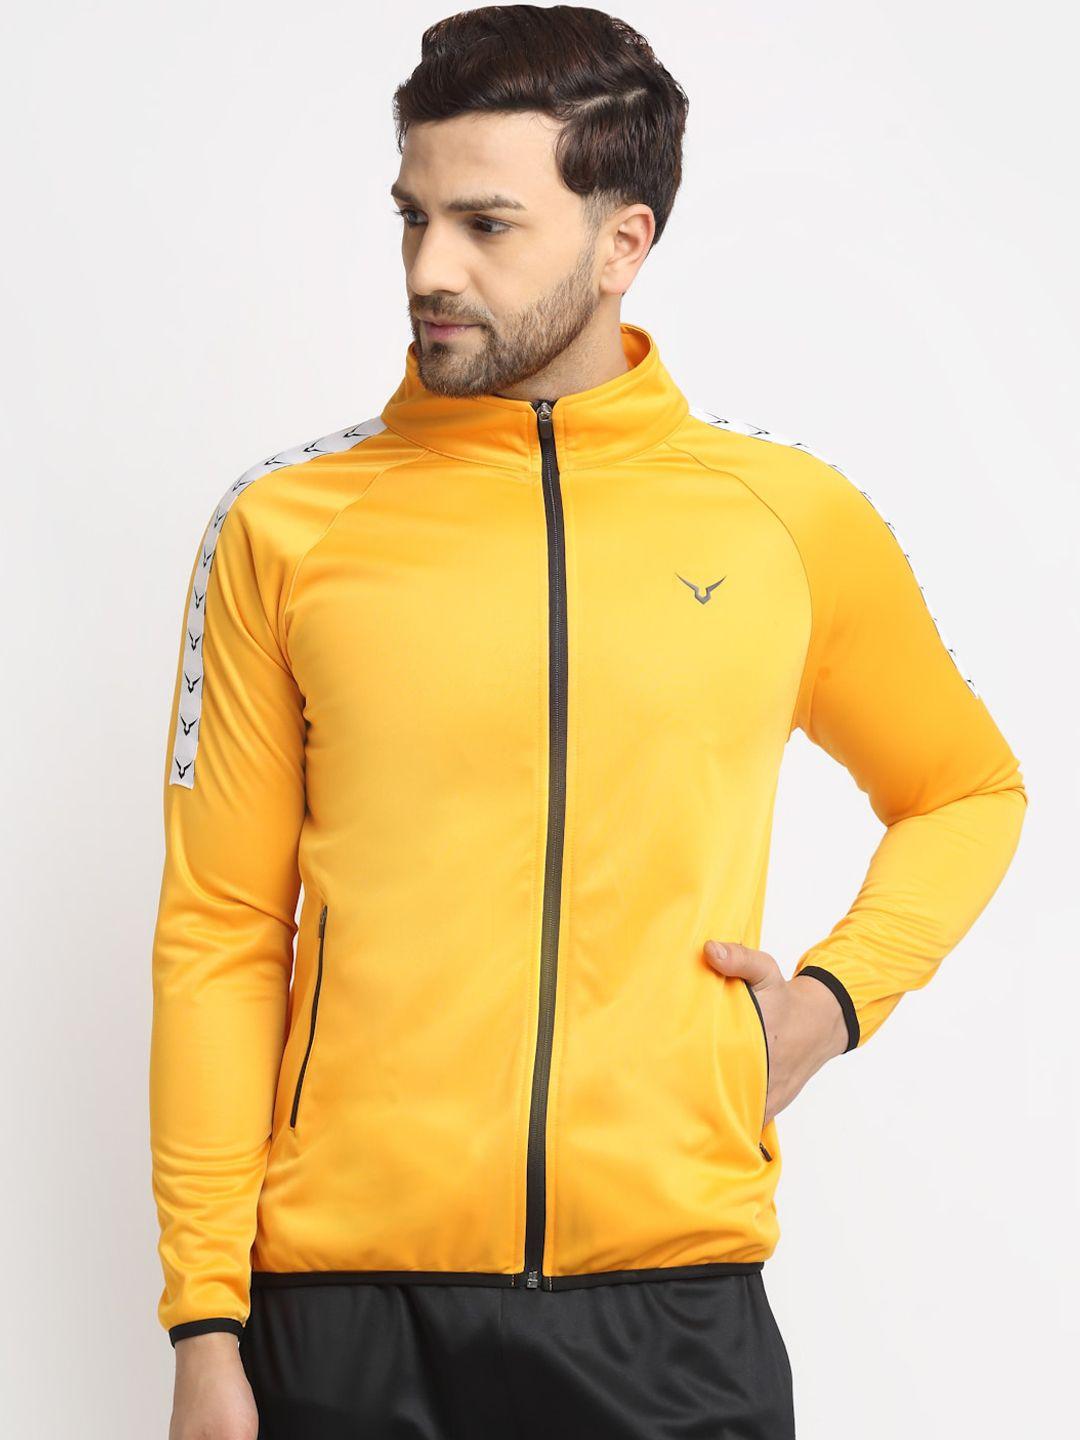 invincible men yellow lightweight rapid dry training or gym sporty jacket